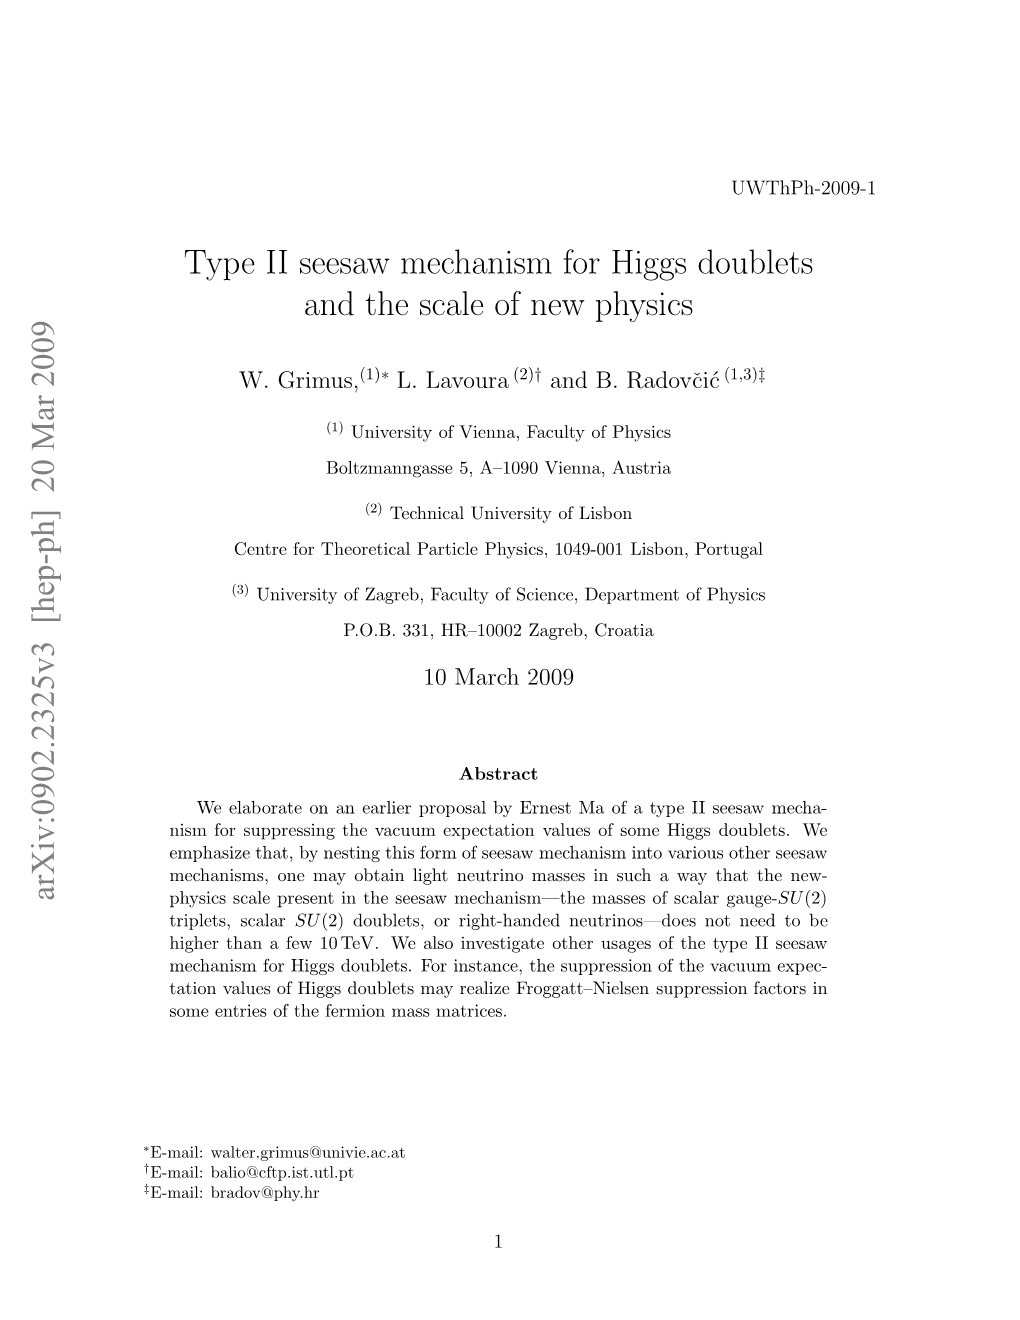 Type II Seesaw Mechanism for Higgs Doublets and the Scale of New Physics